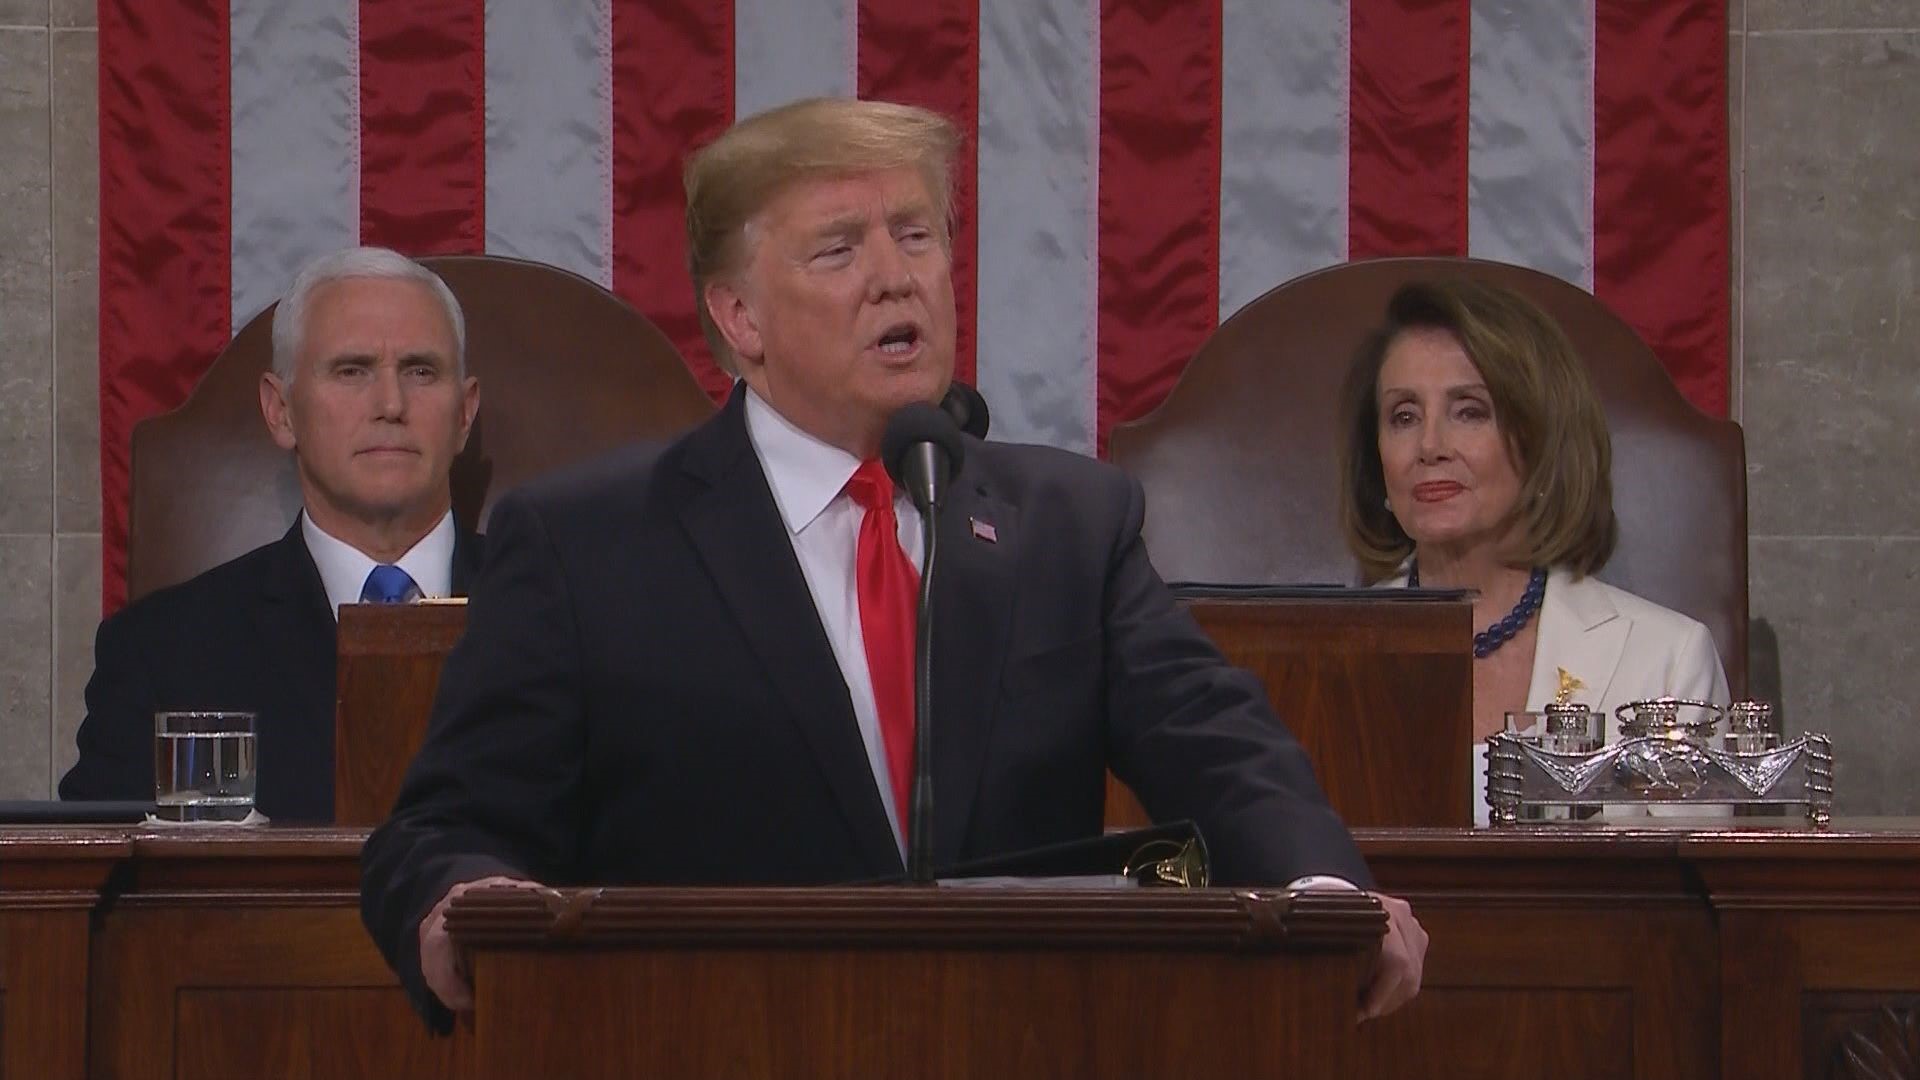 Trump talked about the economy, border control, healthcare, and other topics during his address.